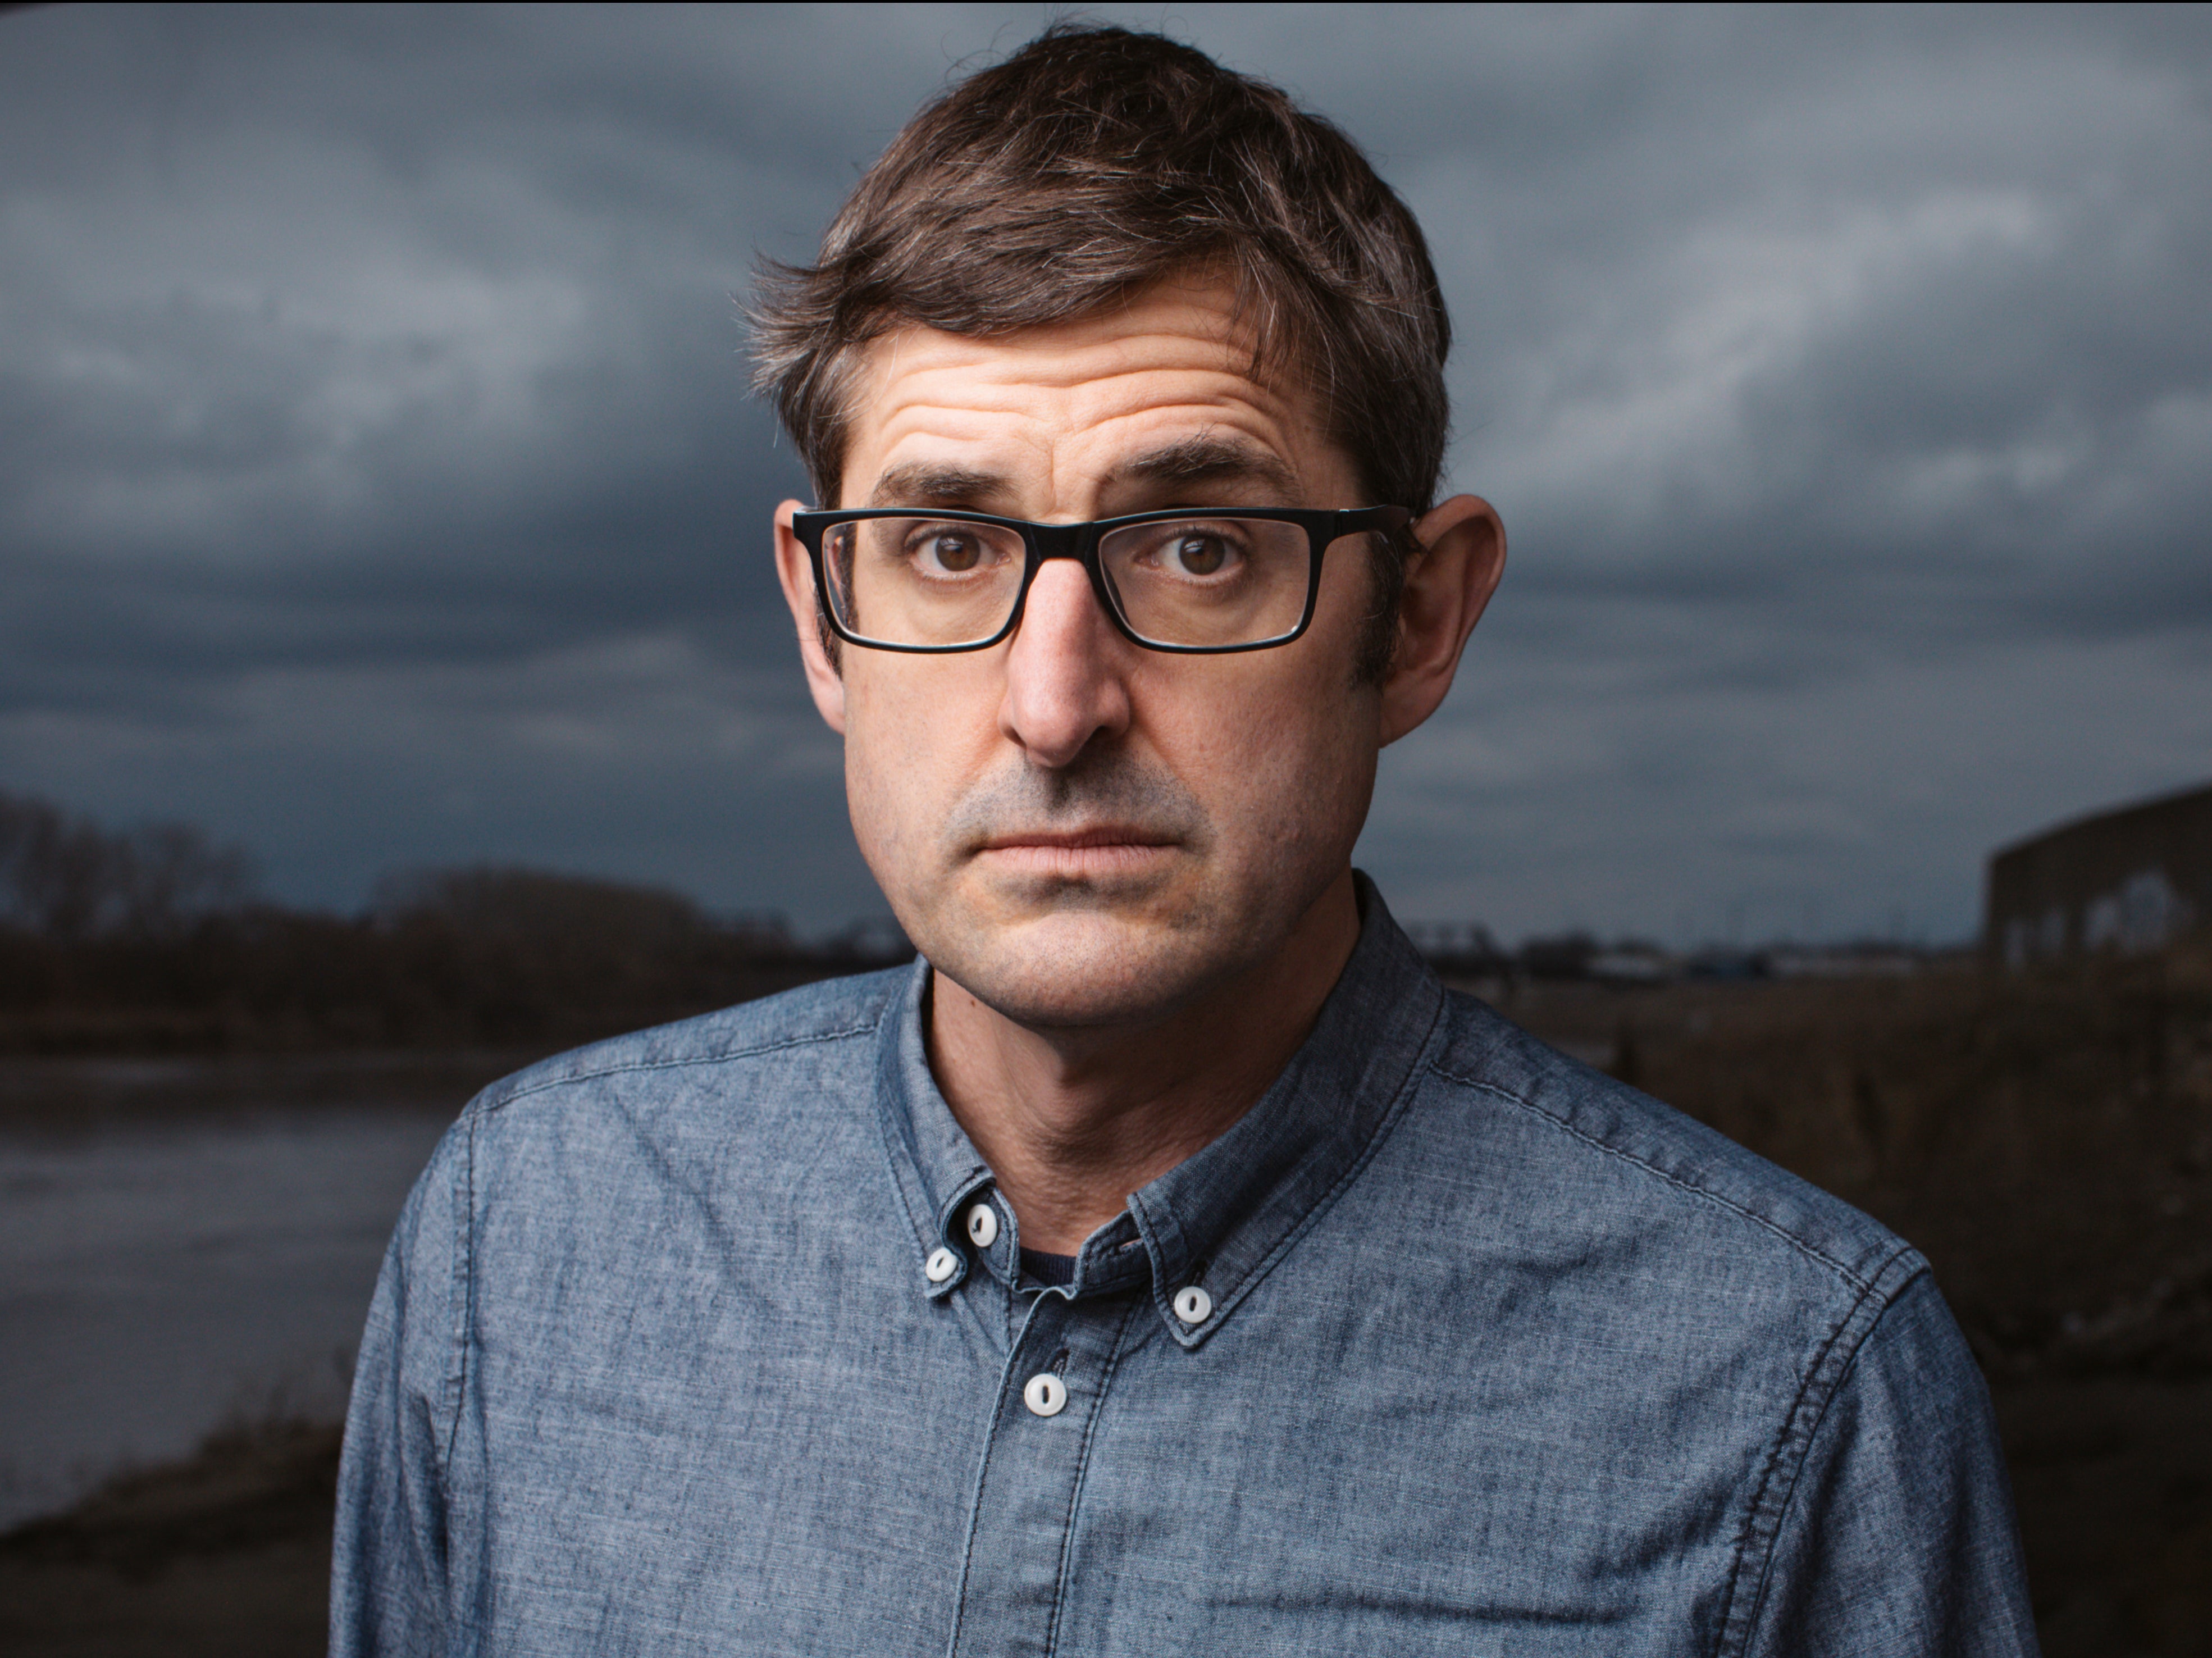 ‘I’m not an outsider any more – it would be weird to pretend otherwise,’ says Theroux